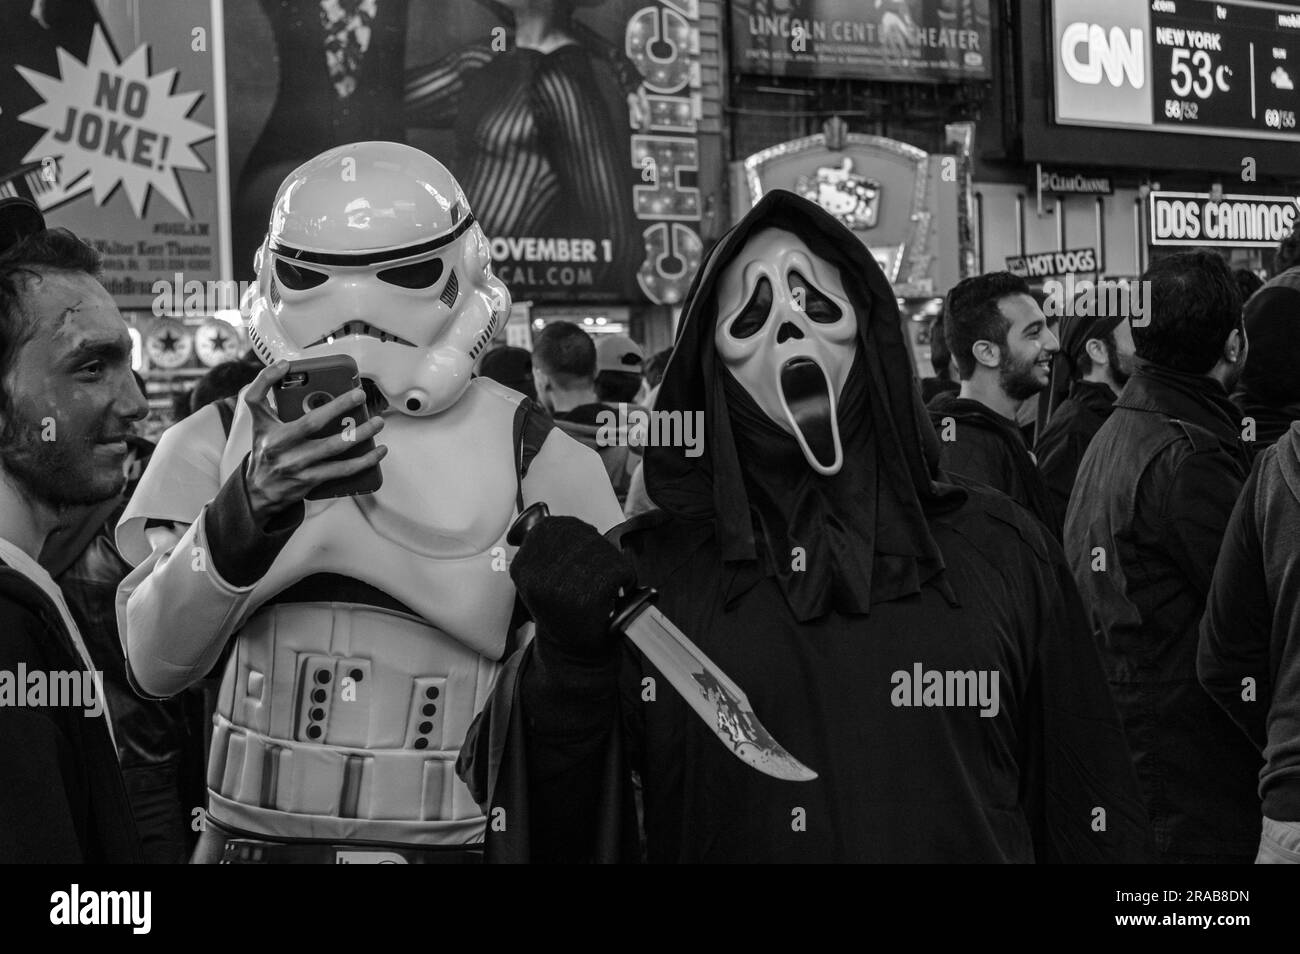 Two people with masks, one checkIng his phone, stand in Times Sq. on Halloween. Stock Photo